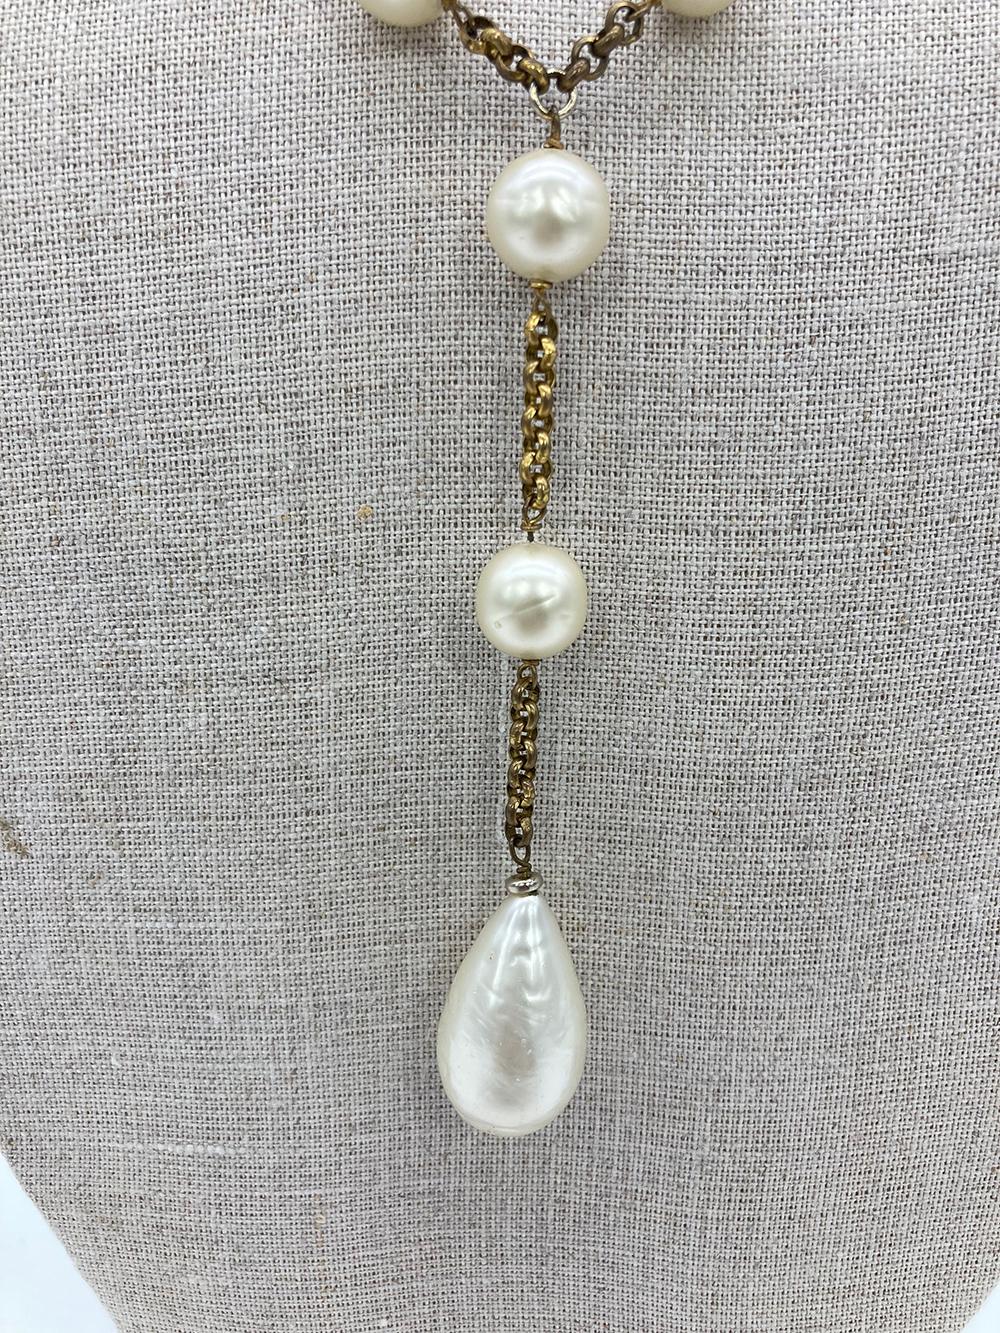 Vintage Chanel Pearl Lariat Necklace in very good condition. 1/2